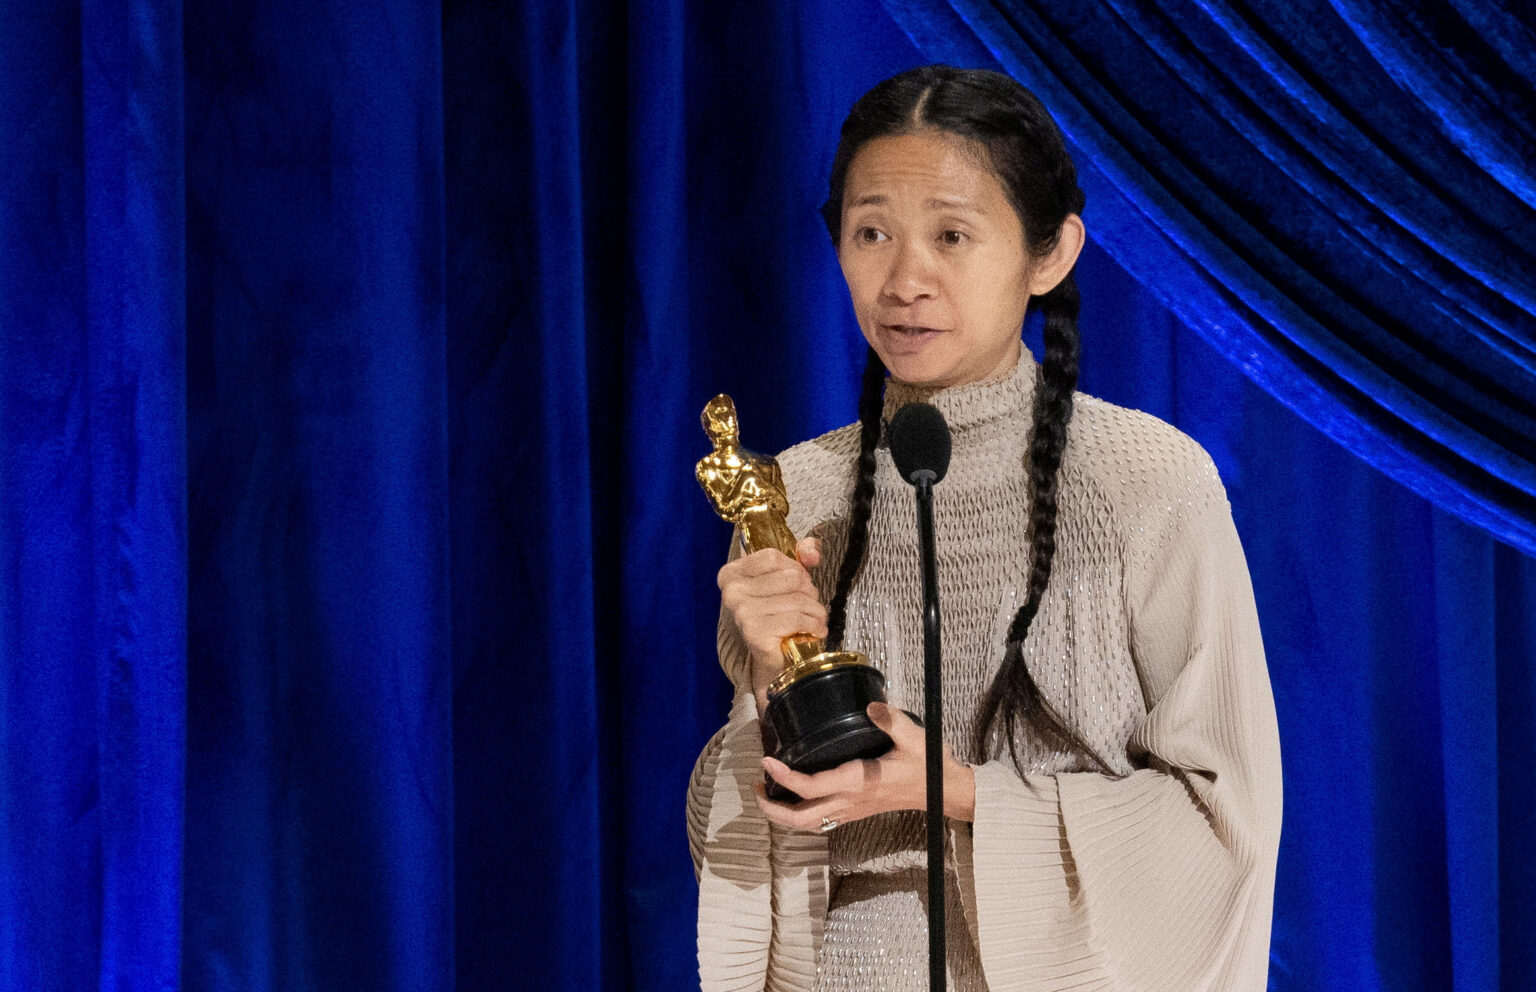 Why has the Oscar only gone to two Best Director winners who are women? Delve into the reasons why women were historically overlooked and still are here.